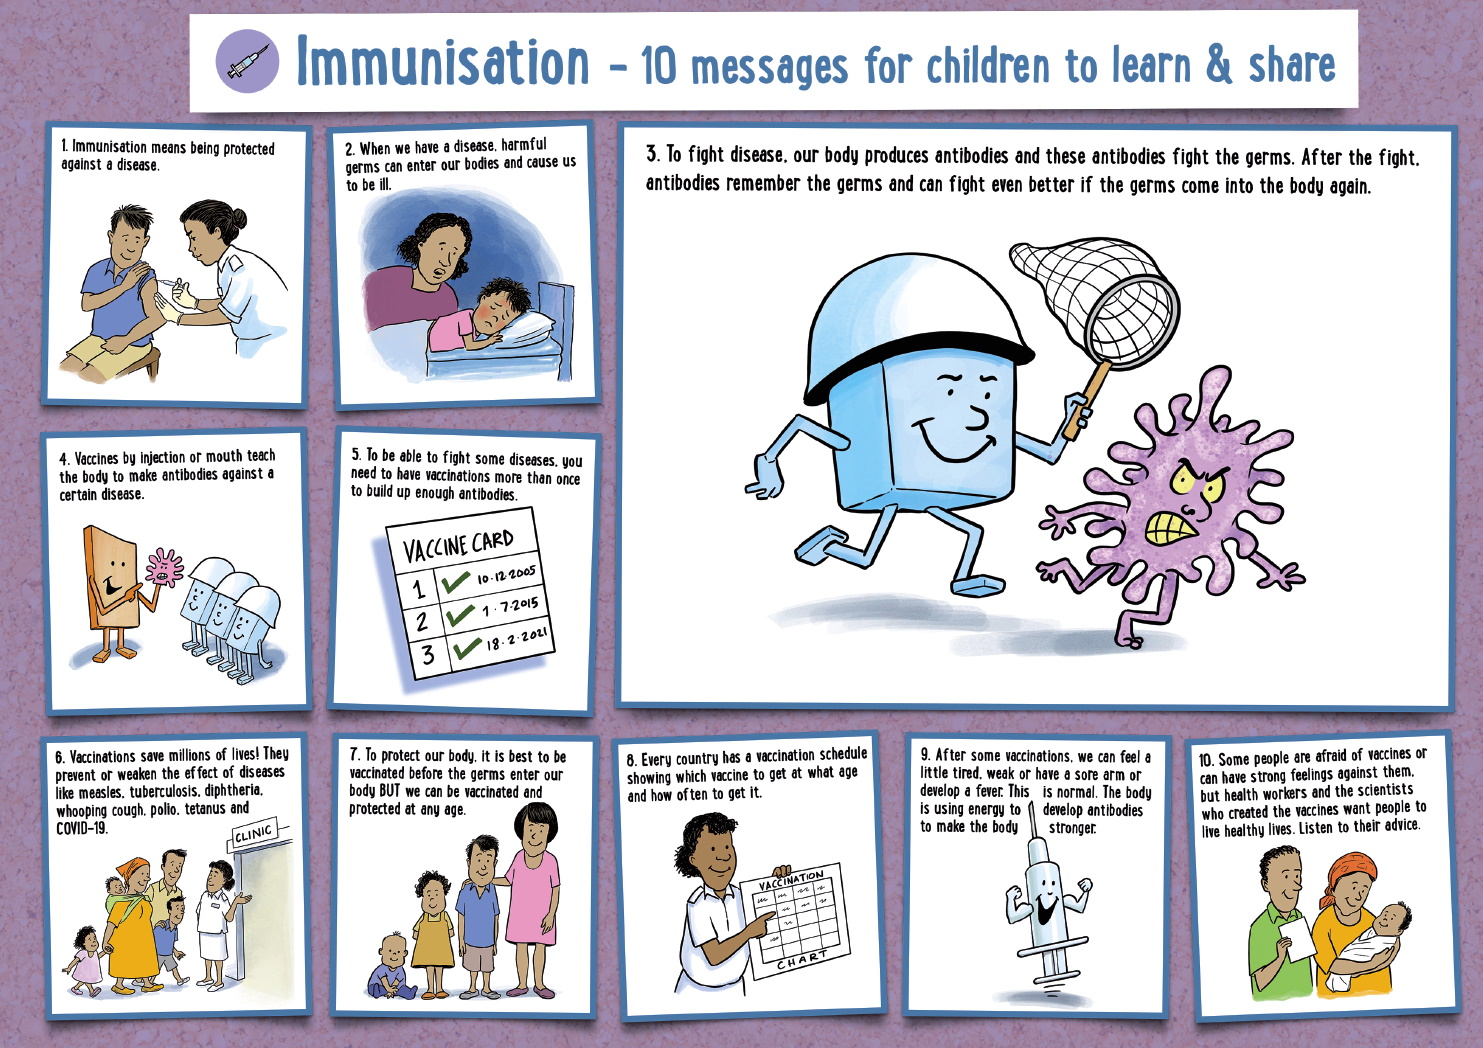 Front of our immunisation poster. It has 10 messages about immunisation that children can learn and share and each message is illustrated.